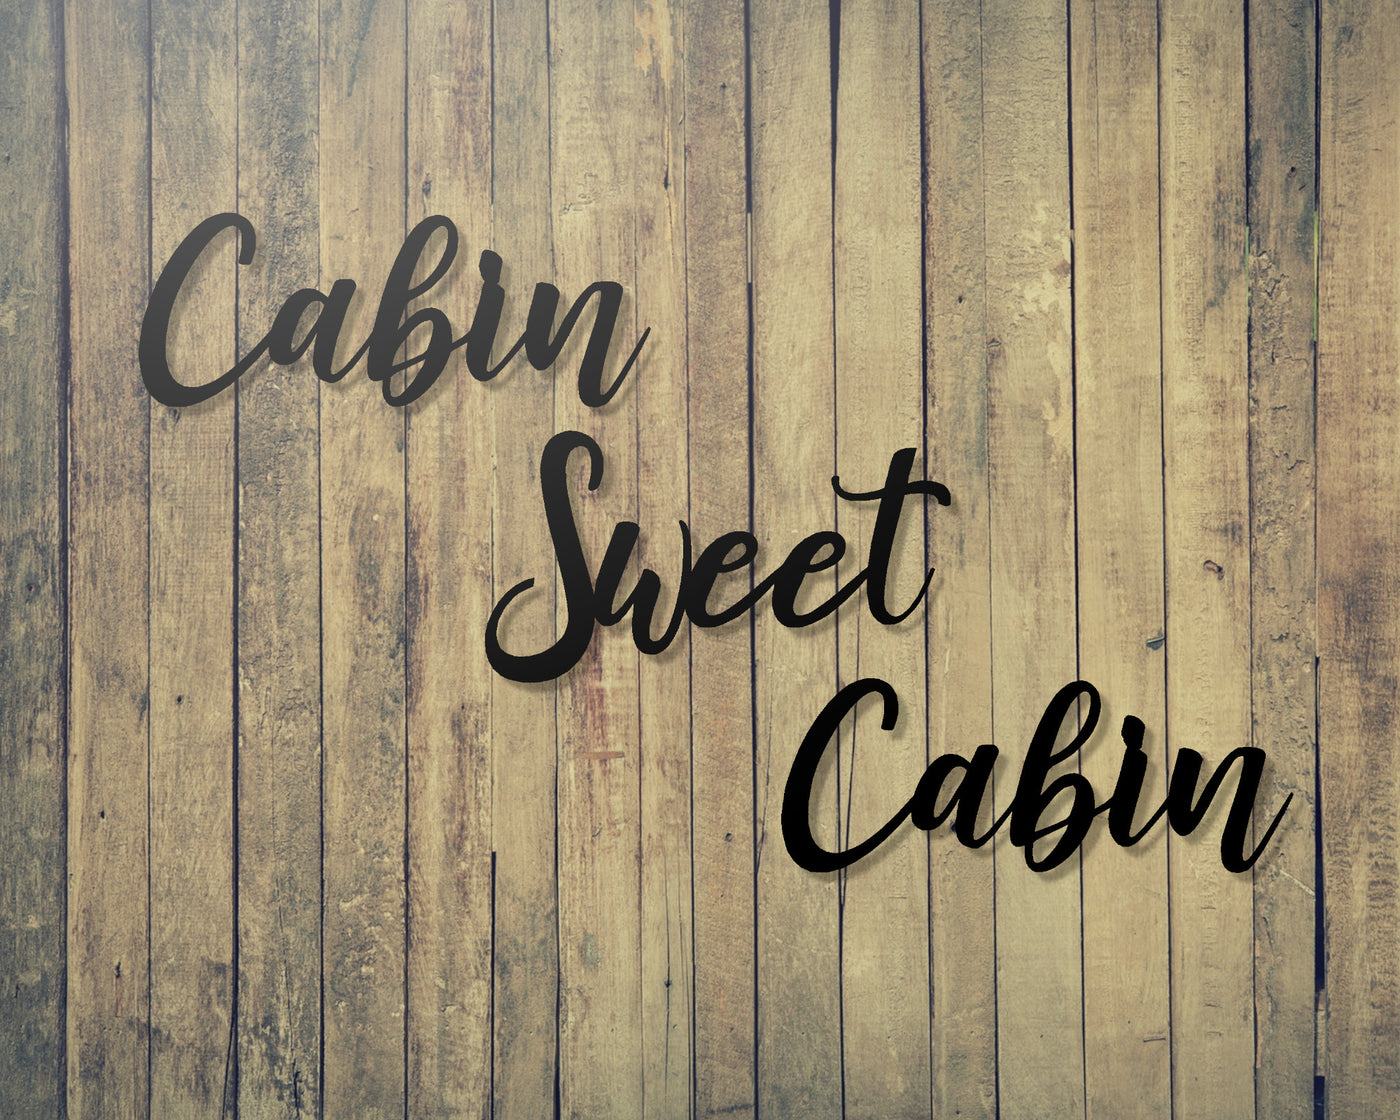 Cabin Sweet Cabin Metal Word Sign - Madison Iron and Wood - Metal Word Art - metal outdoor decor - Steel deocrations - american made products - veteran owned business products - fencing decorations - fencing supplies - custom wall decorations - personalized wall signs - steel - decorative post caps - steel post caps - metal post caps - brackets - structural brackets - home improvement - easter - easter decorations - easter gift - easter yard decor